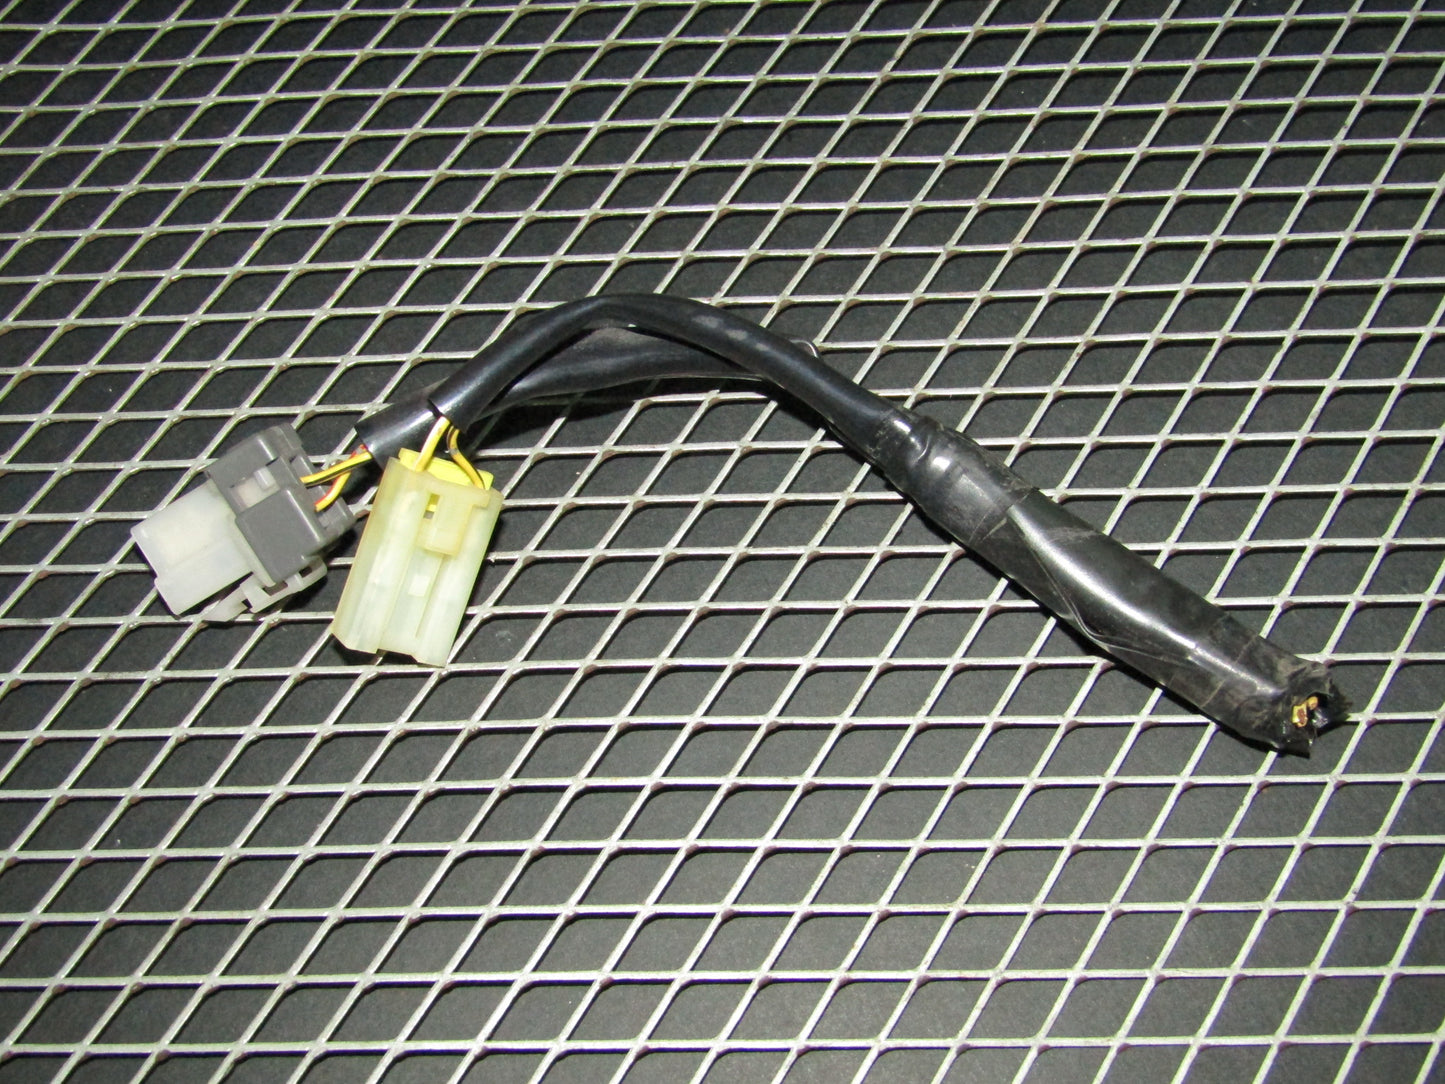 94 95 96 97 Mitsubishi 3000GT OEM A/C Evaporator Core Pigtail Harness